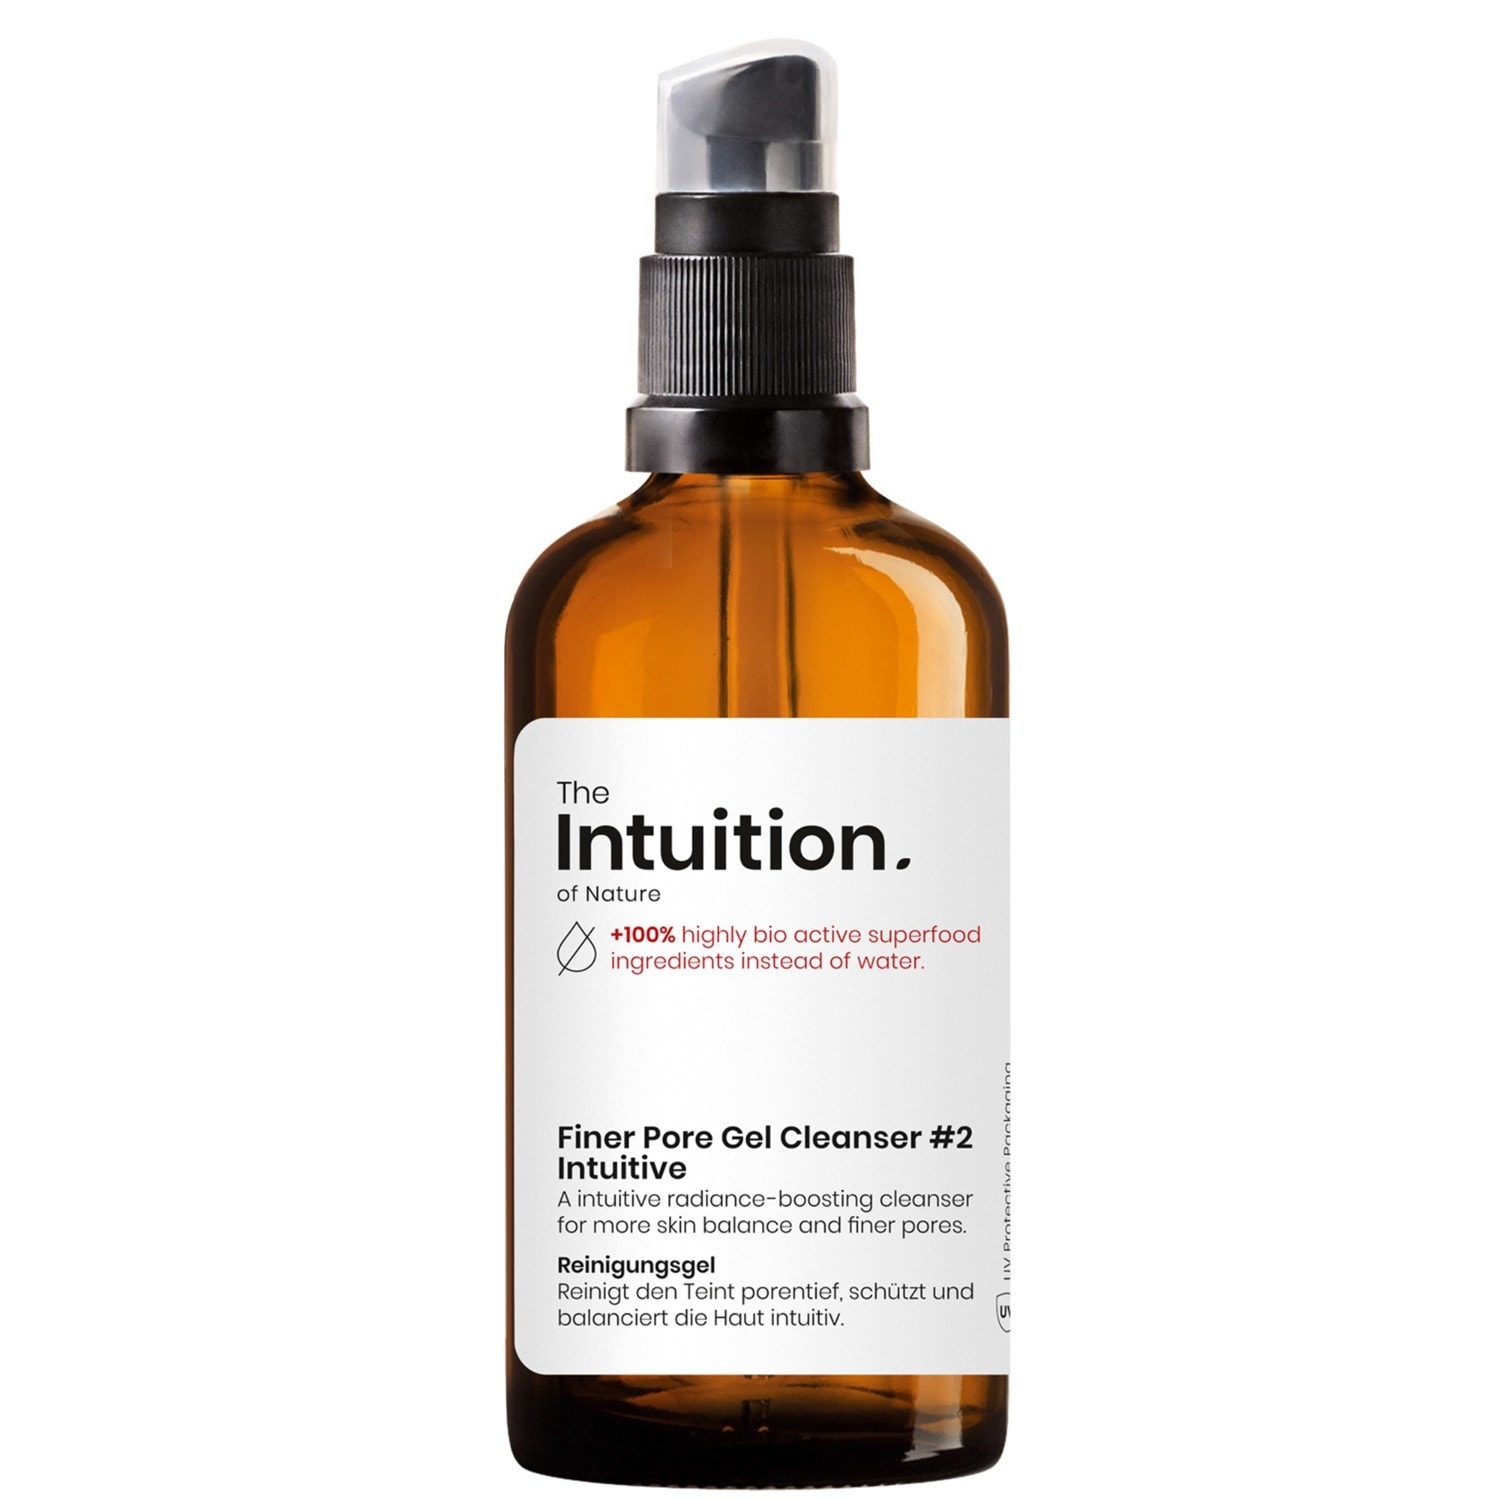 The Intuition Of Nature Finer Pore Gel Cleanser #2 Intuitive